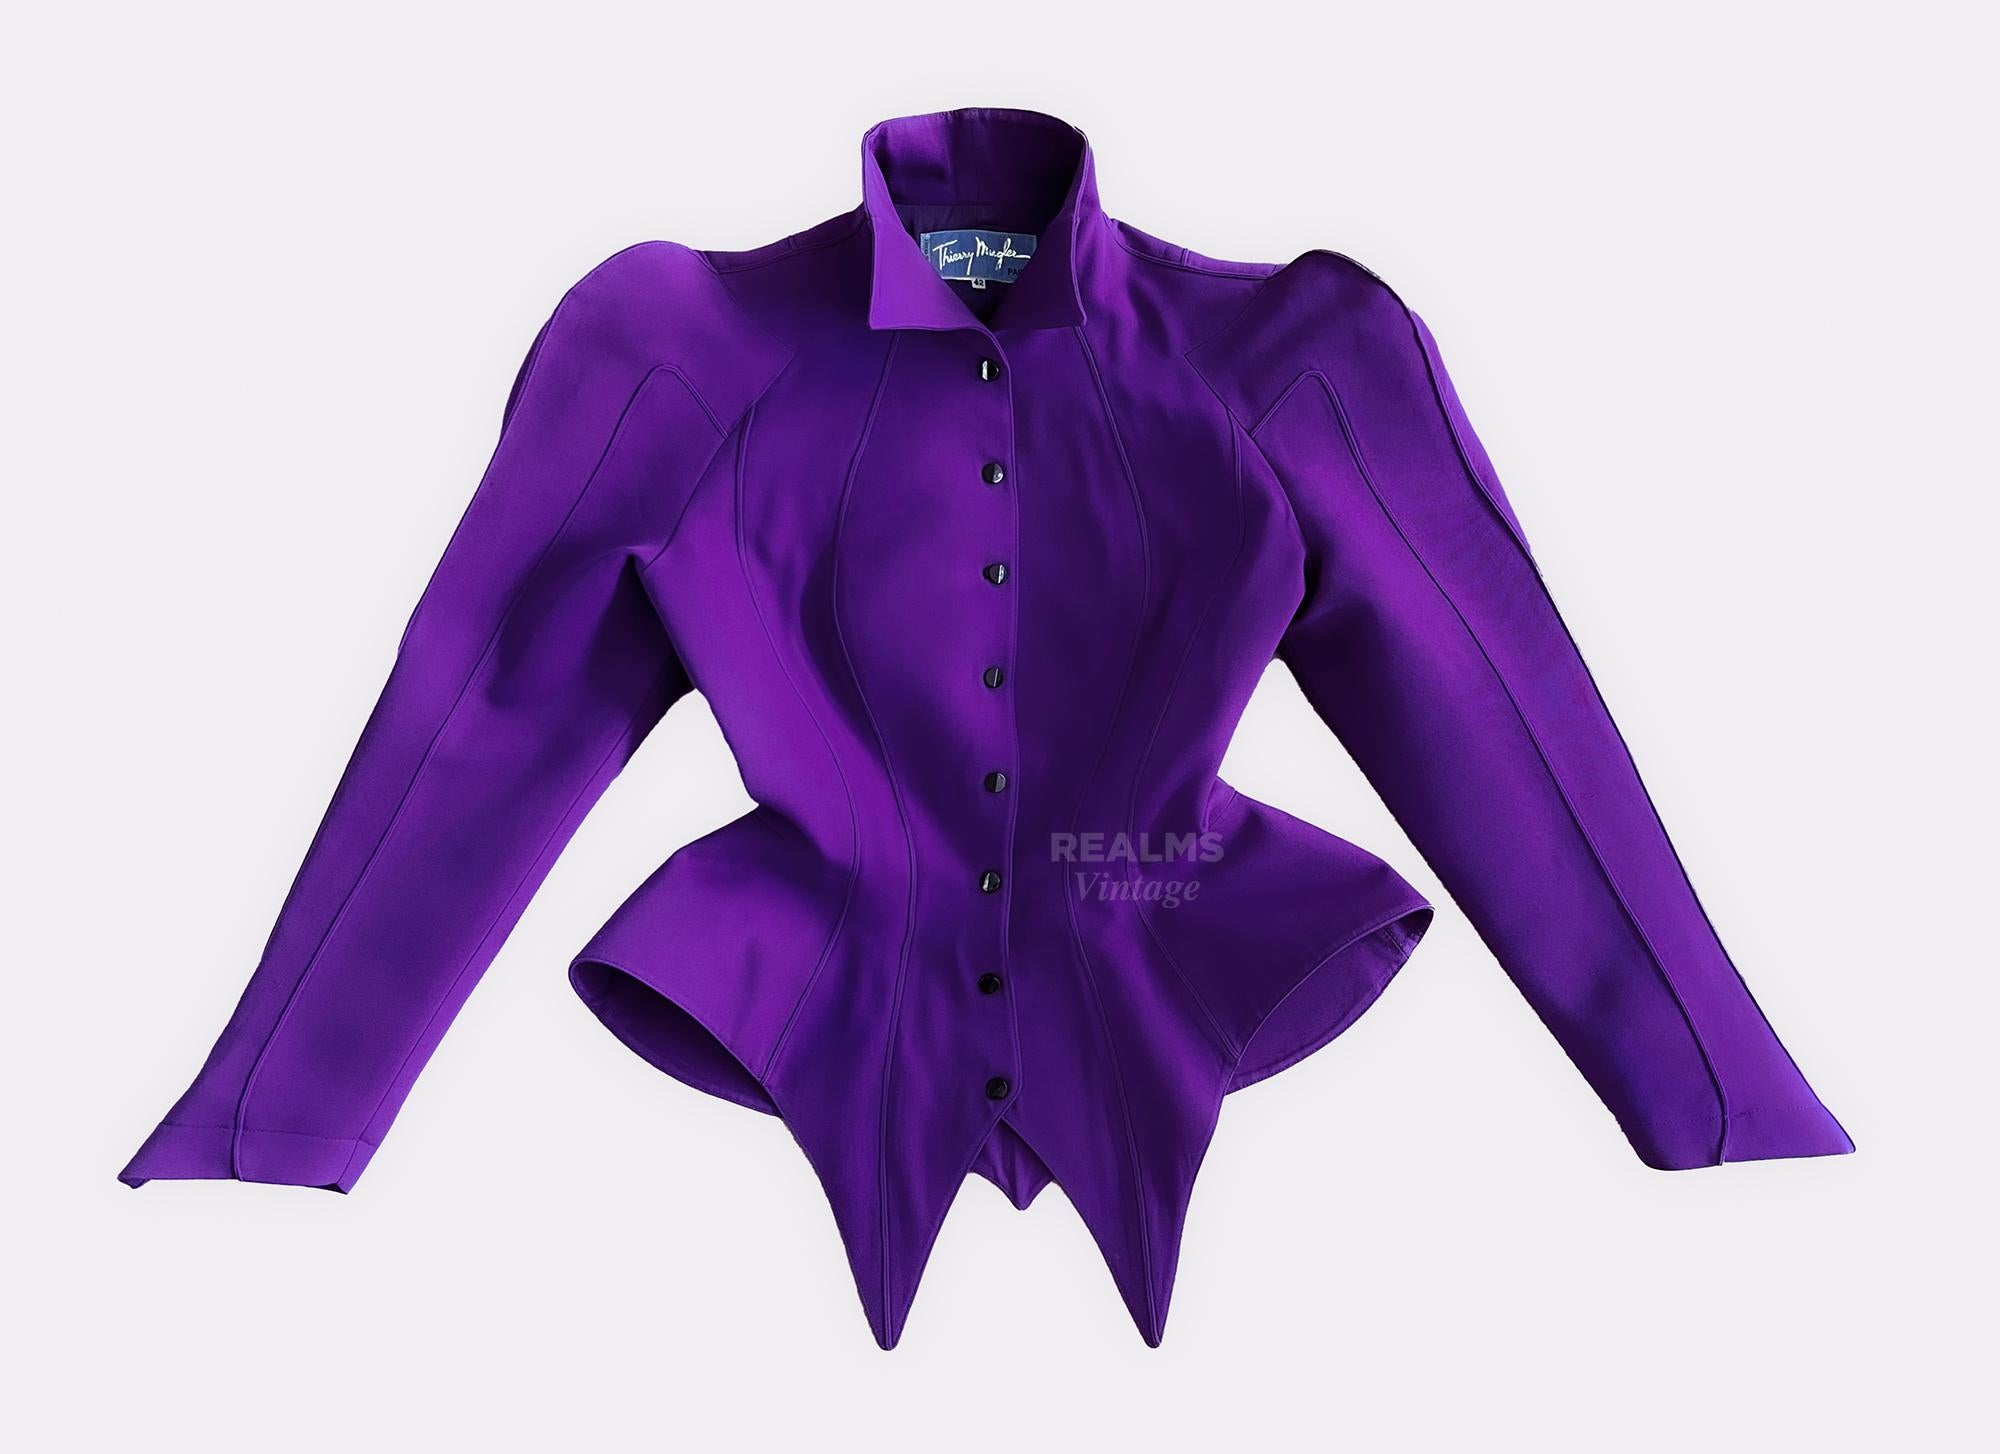 Iconic Thierry Mugler LES INFERNALES Suit 1988/89 Jacket Skirt For Sale 7